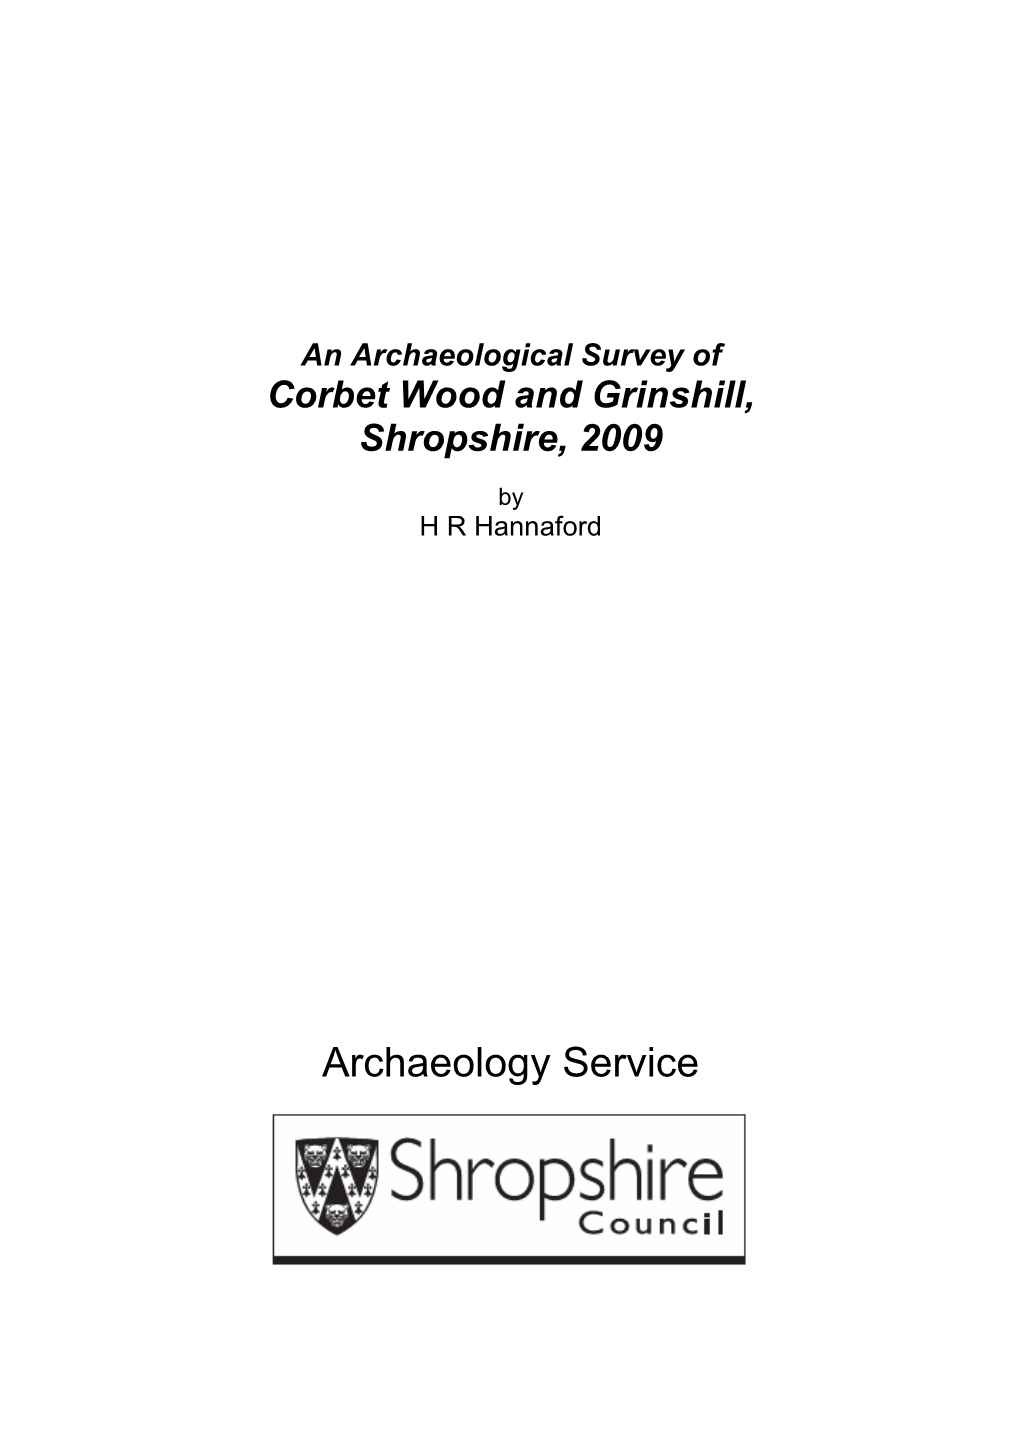 An Archaeological Survey of Corbet Wood and Grinshill, Shropshire, 2009